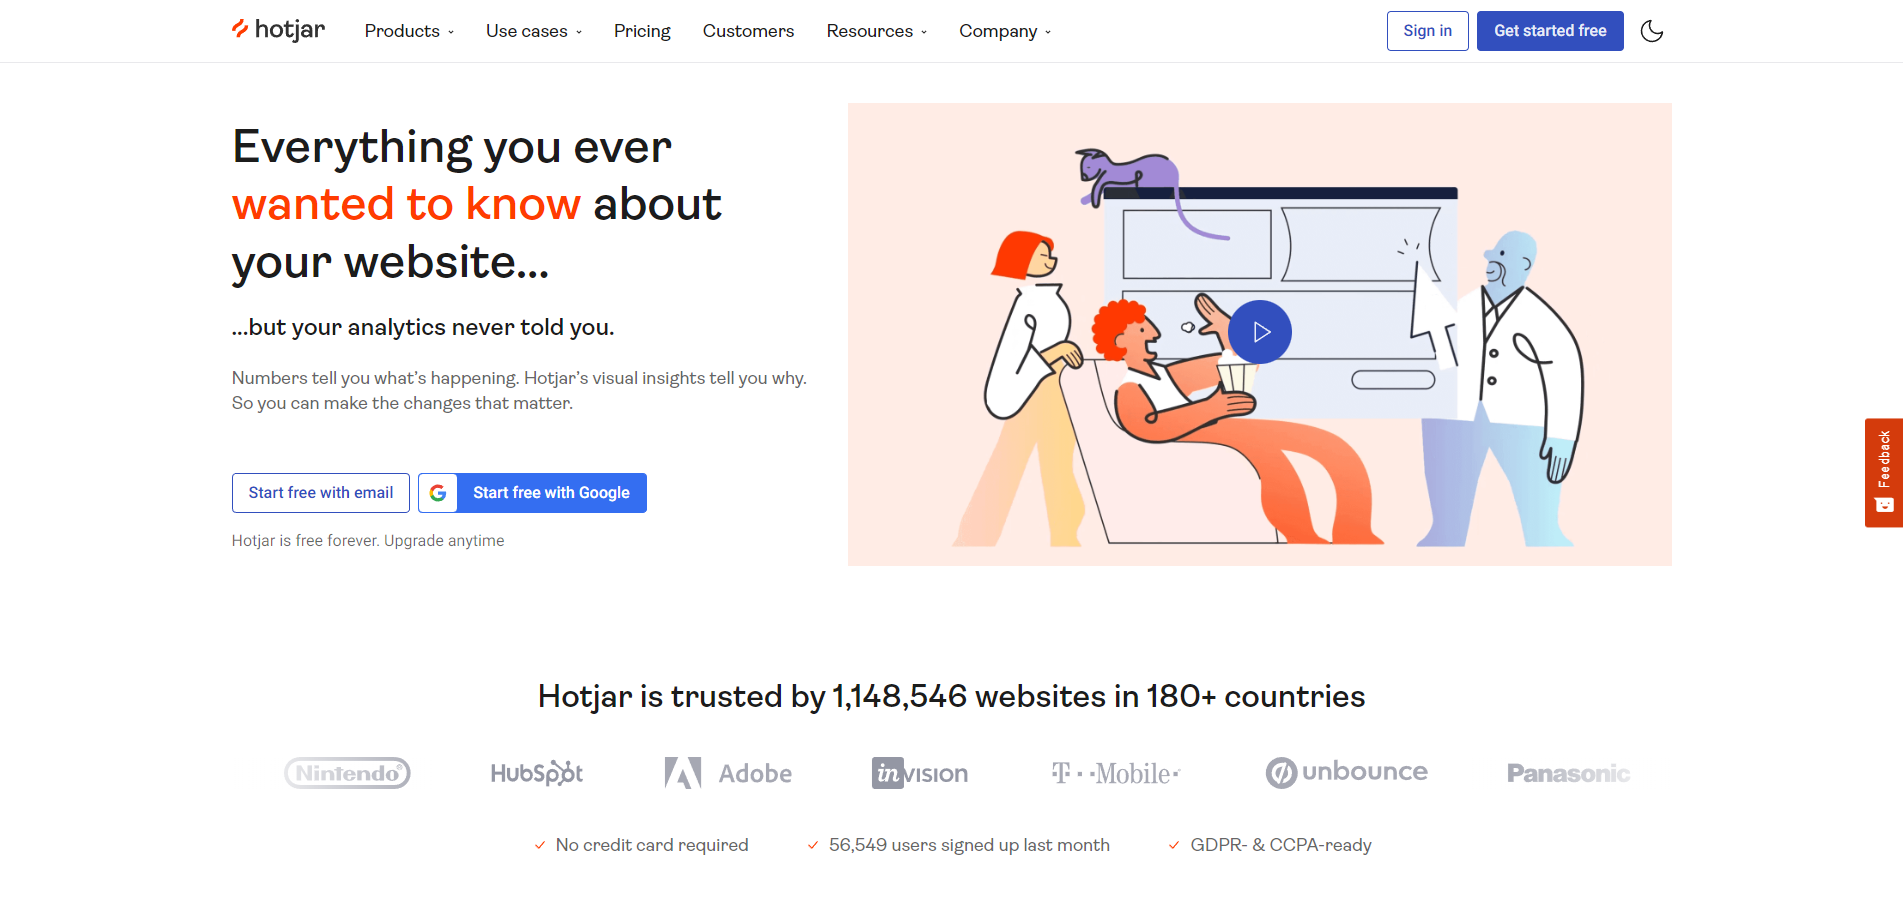 Homepage of hotjar.com showing the content above-the-fold.